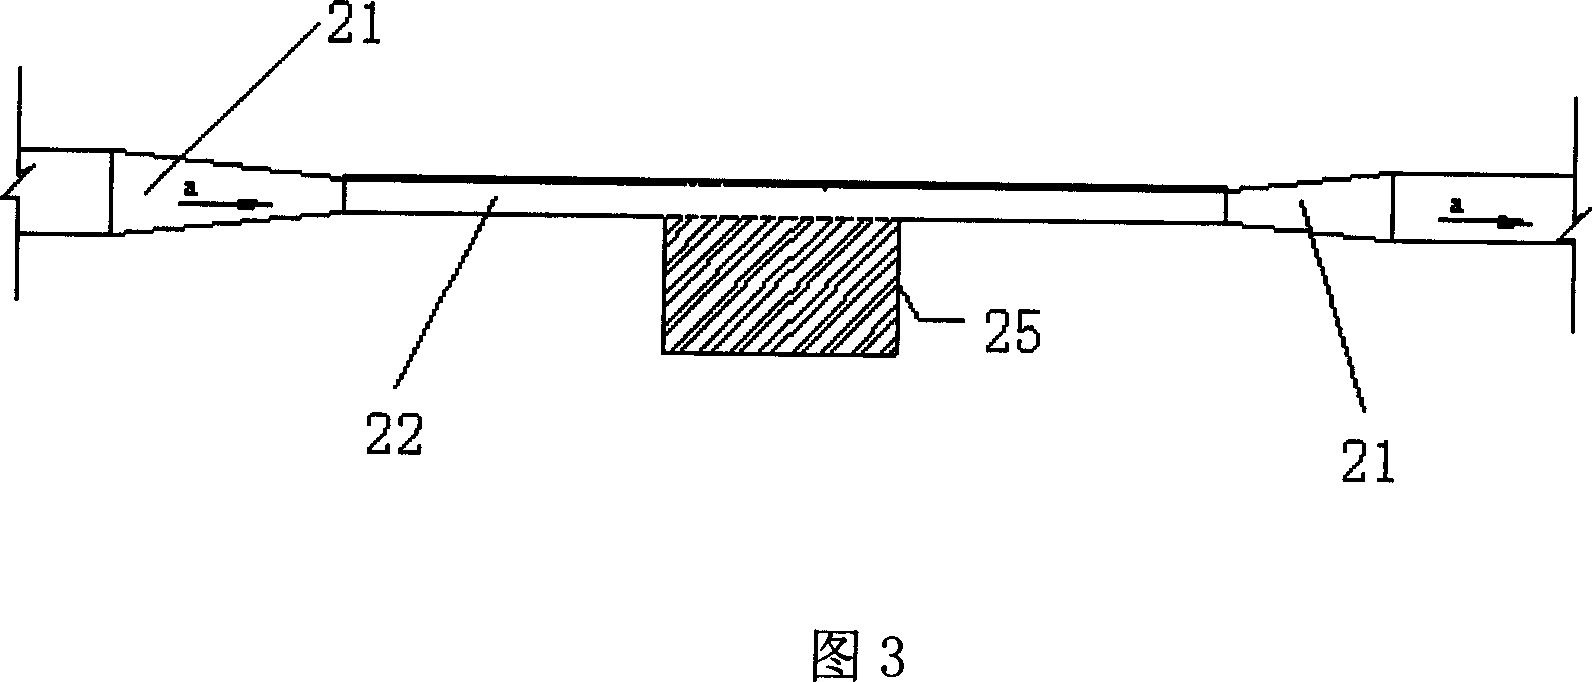 Experimental apparatus for determining runway lawn protection-slope impact-proof performance